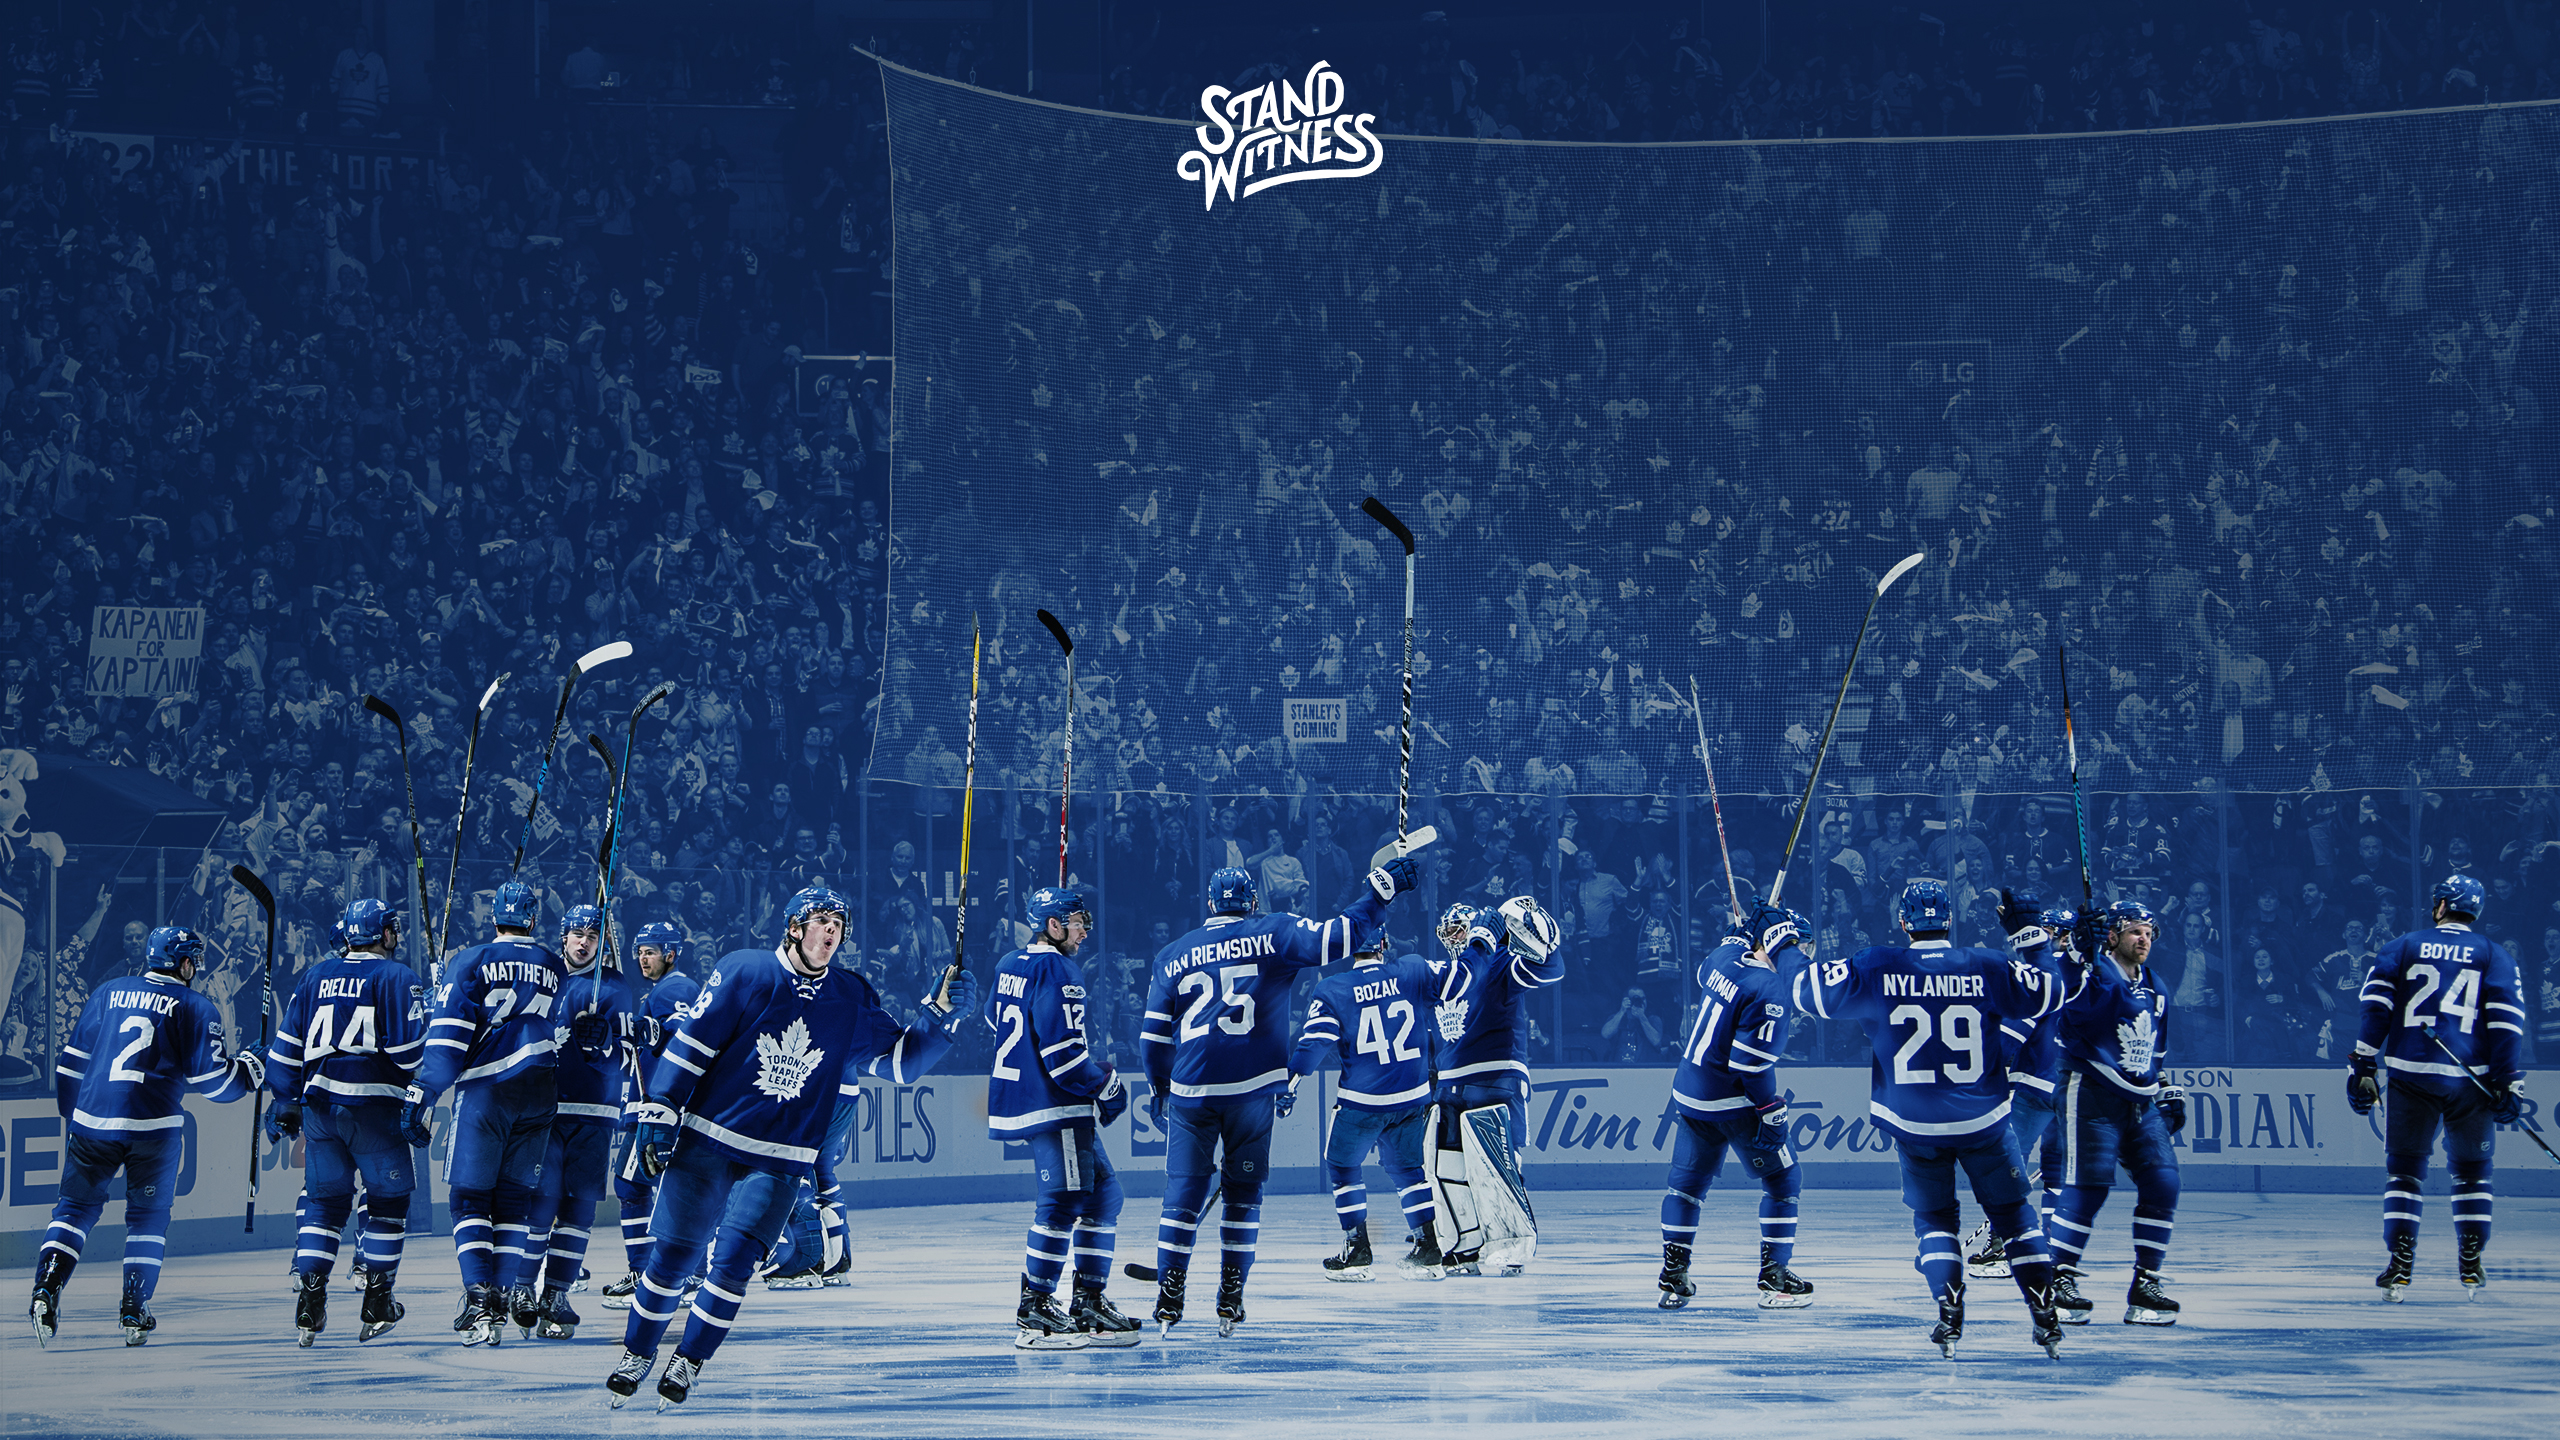 Hdq Cover Top On F - Toronto Maple Leafs 2019 - HD Wallpaper 